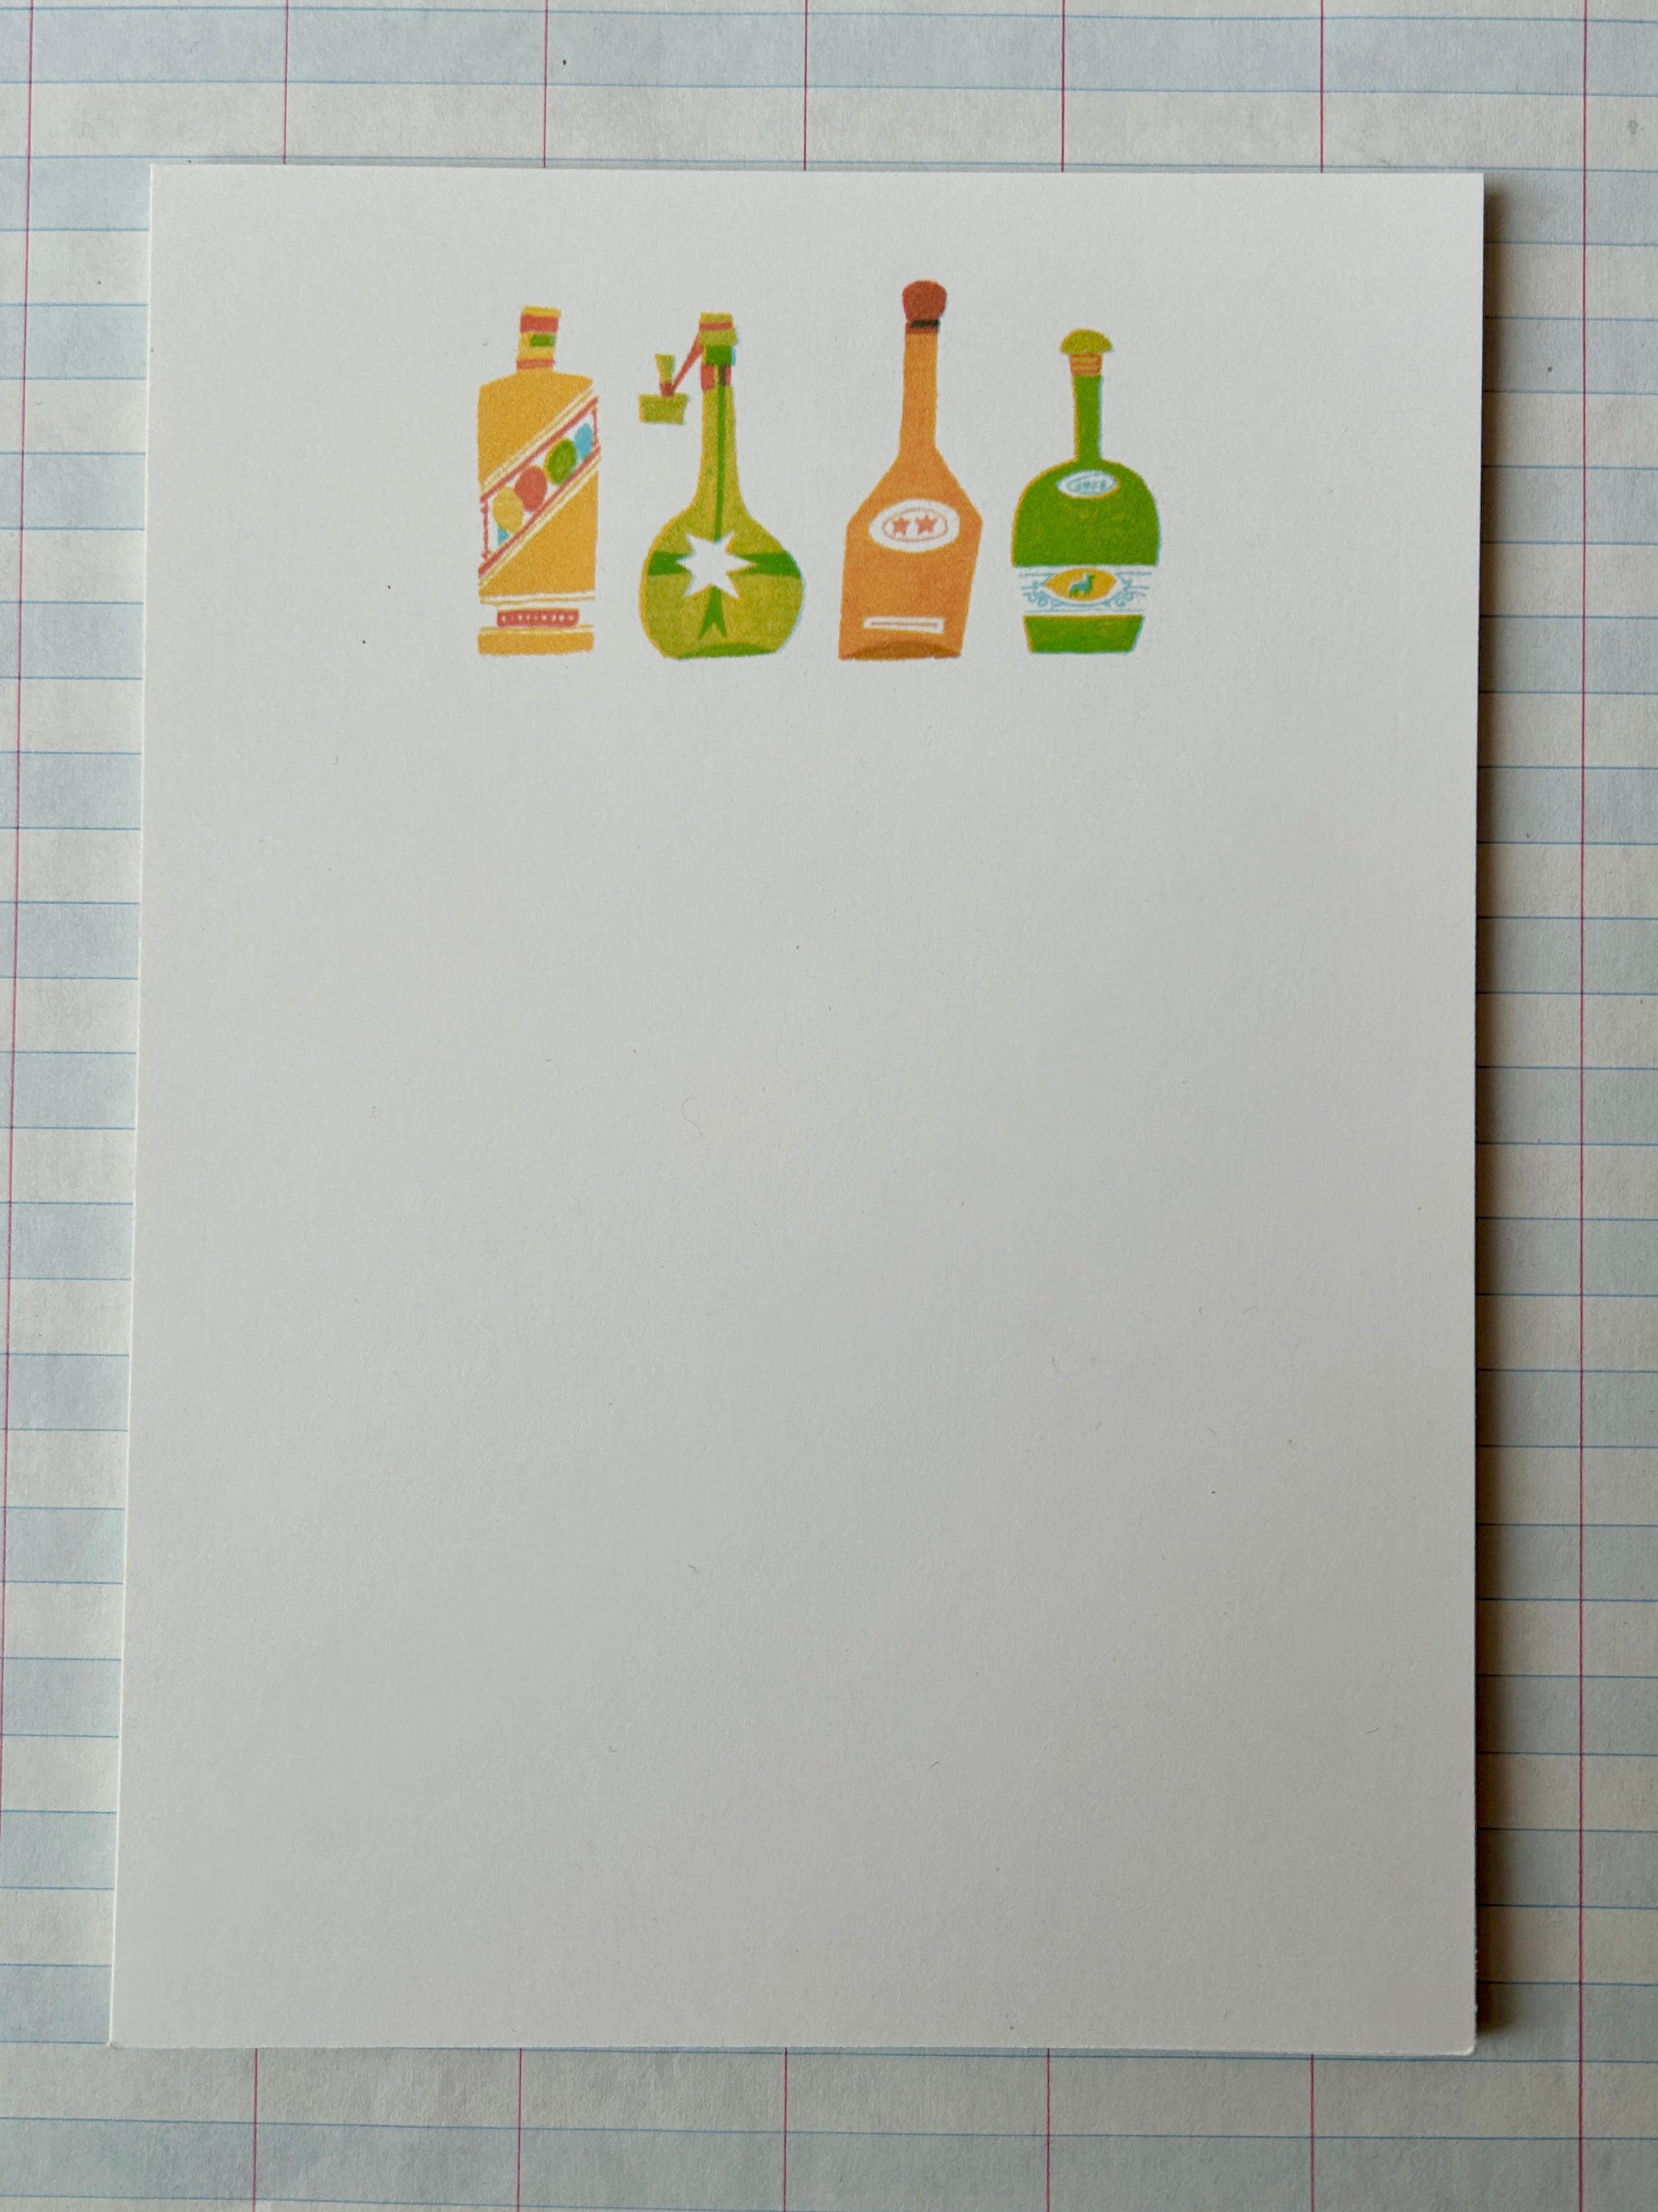 On the Bar Cart Stationery